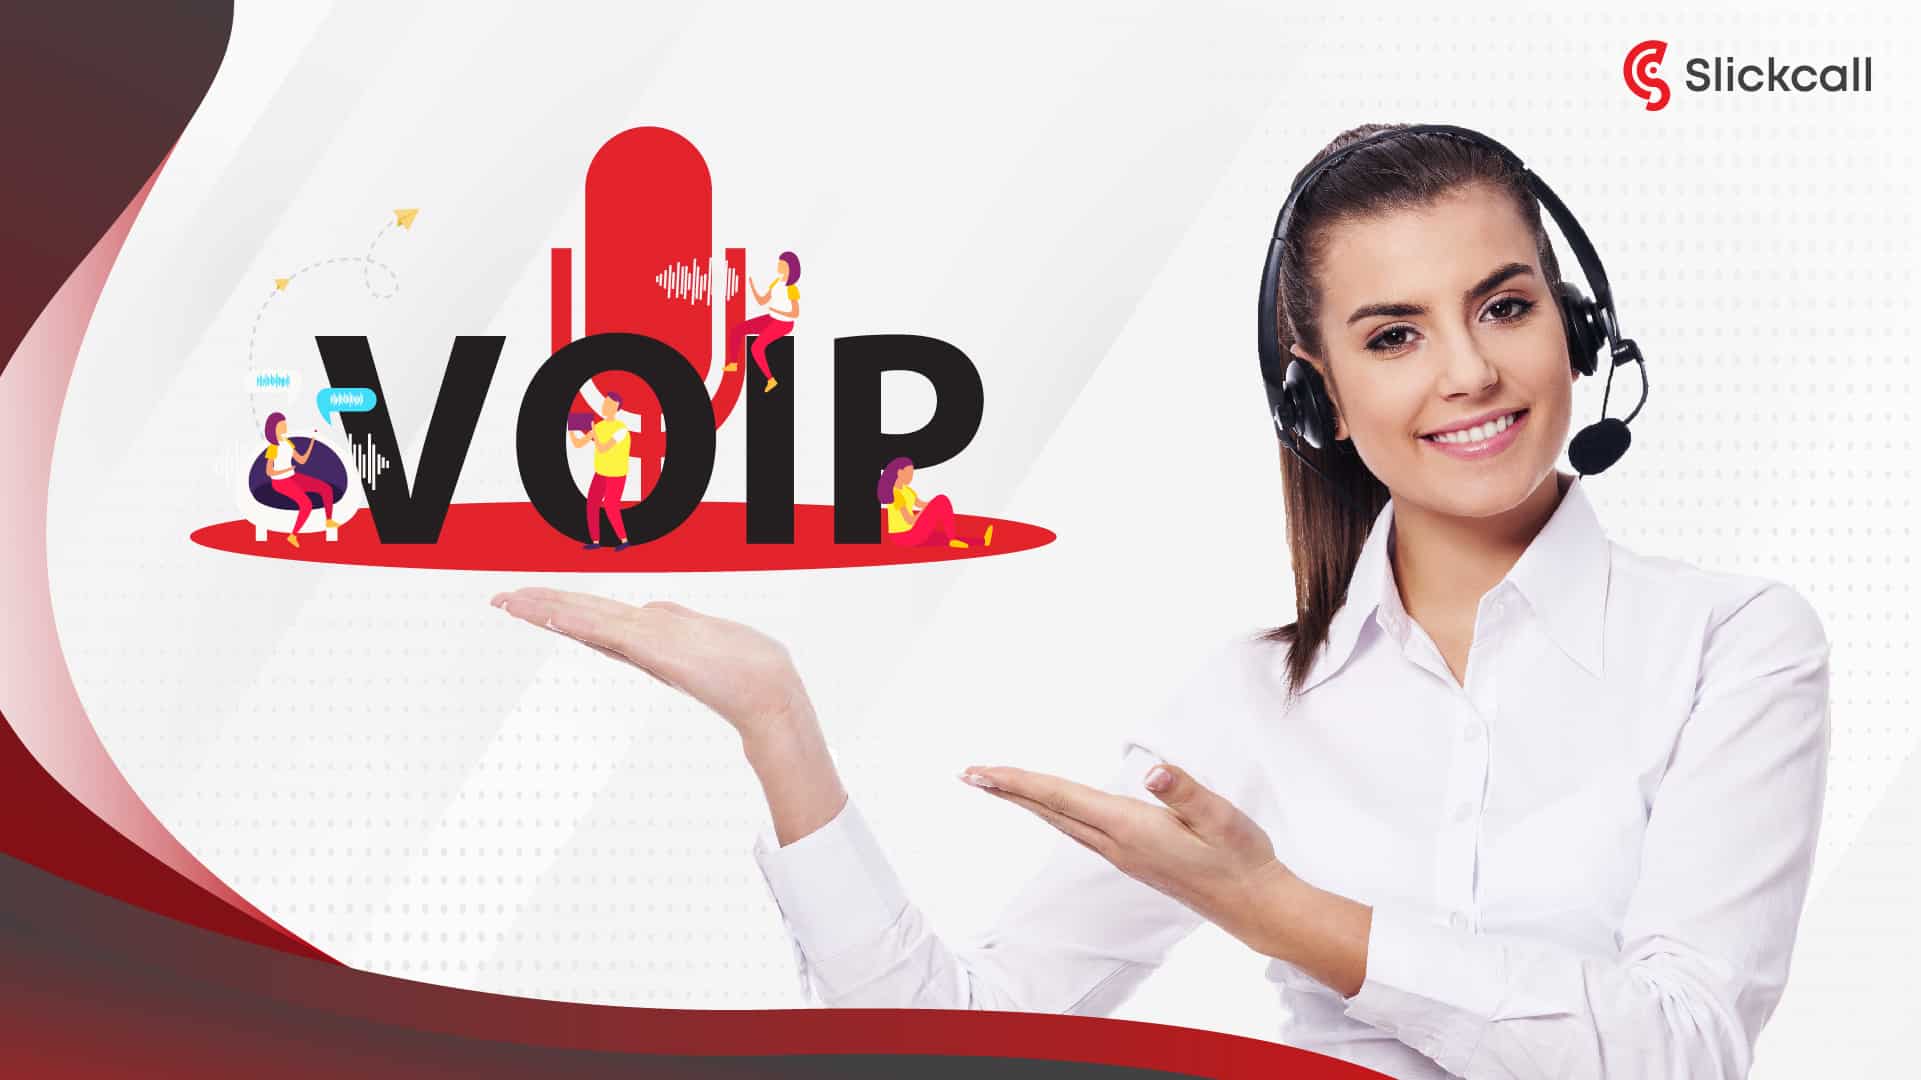 VoIP service providers for Cheap international calling